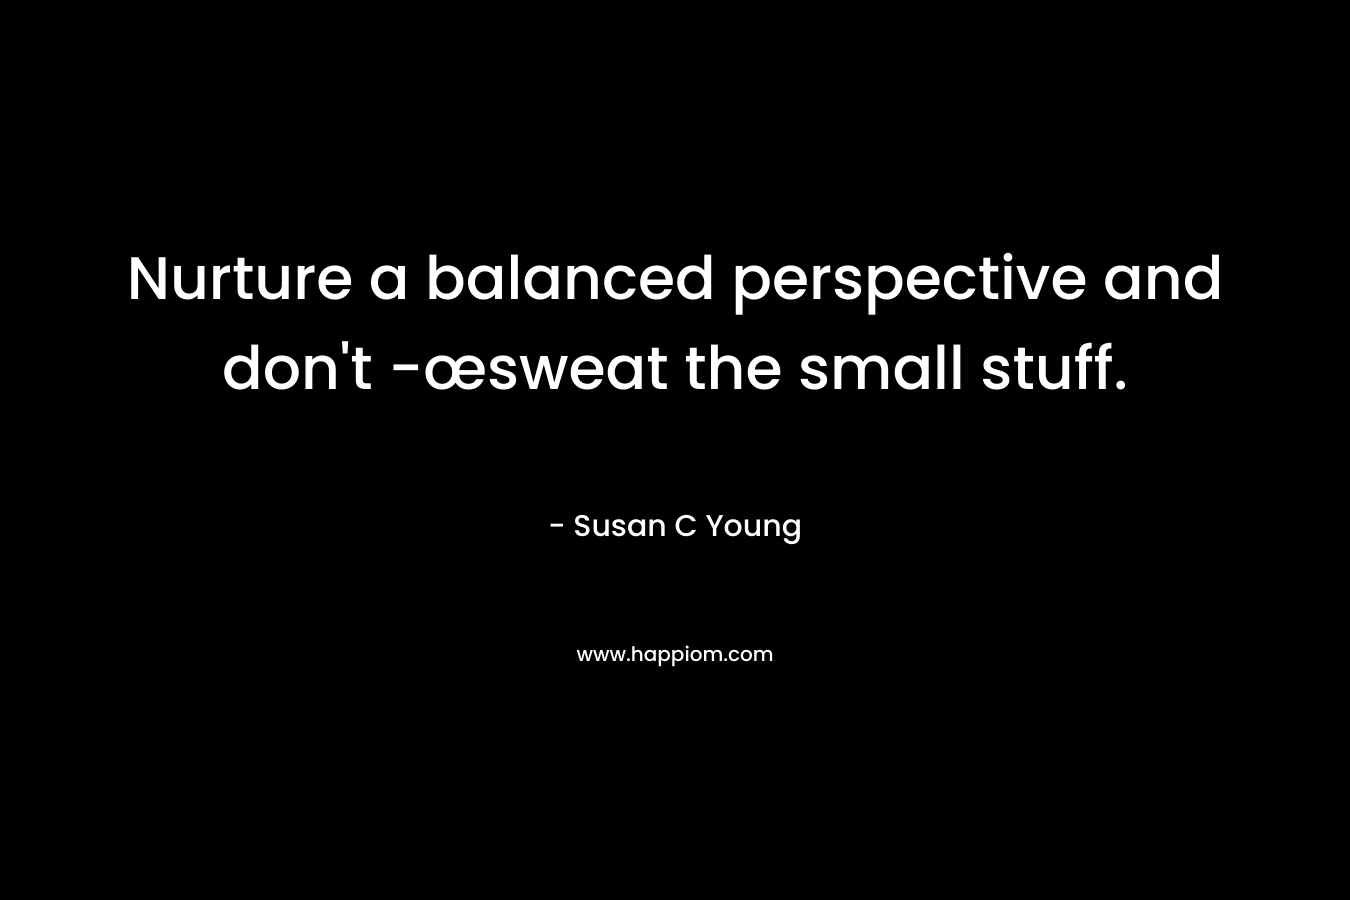 Nurture a balanced perspective and don’t -œsweat the small stuff. – Susan C Young